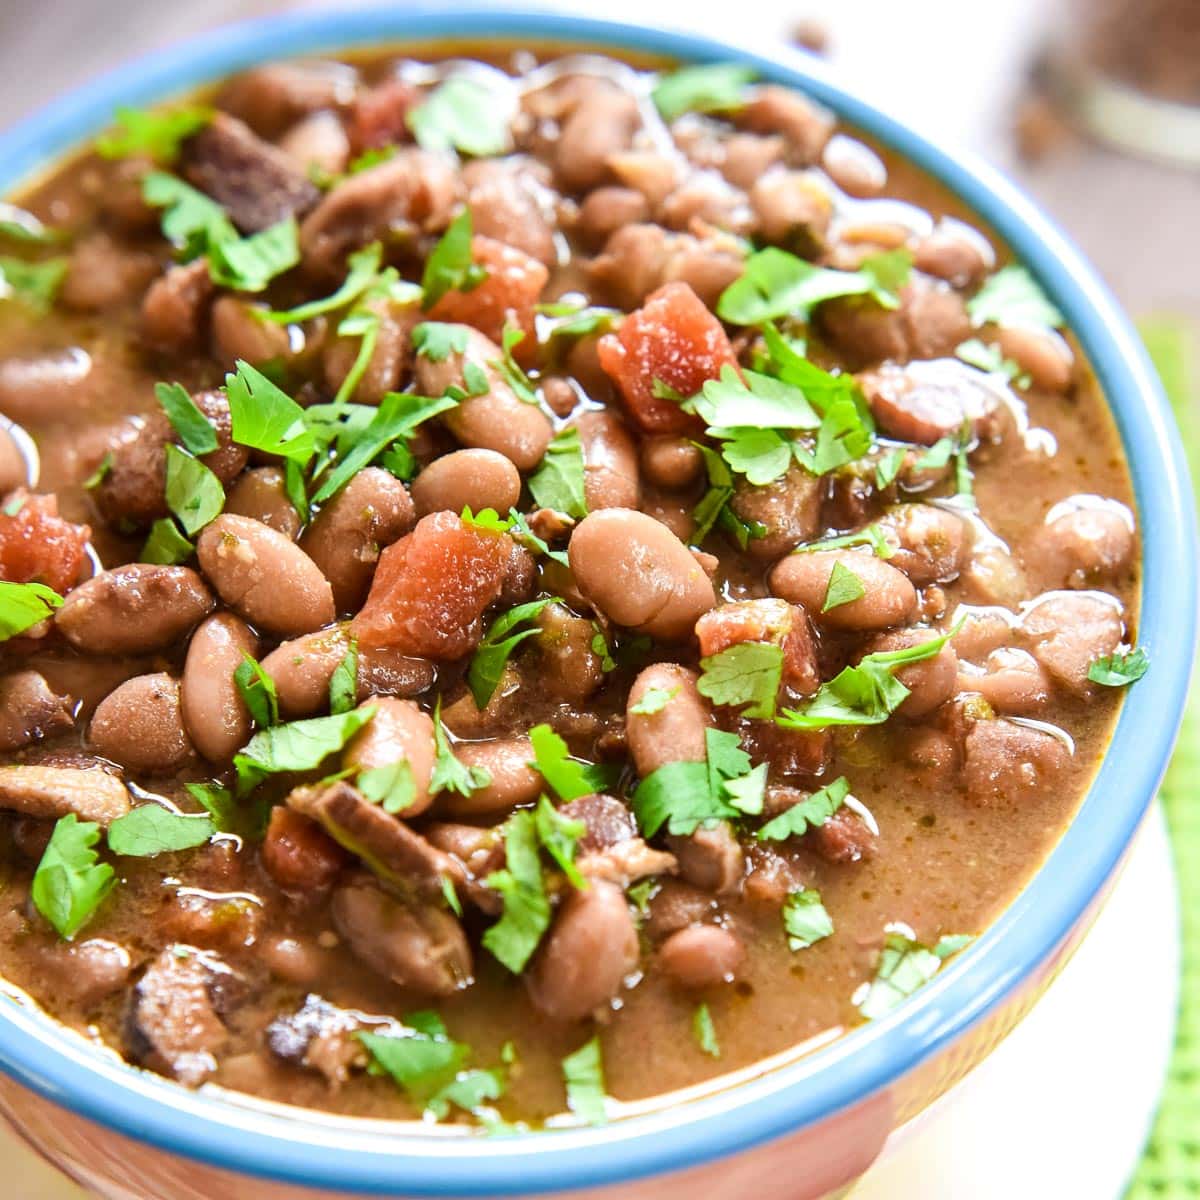 https://www.fivehearthome.com/wp-content/uploads/2023/08/Charro-Beans-Recipe-by-FiveHeartHome_1200pxFeatured-1.jpg